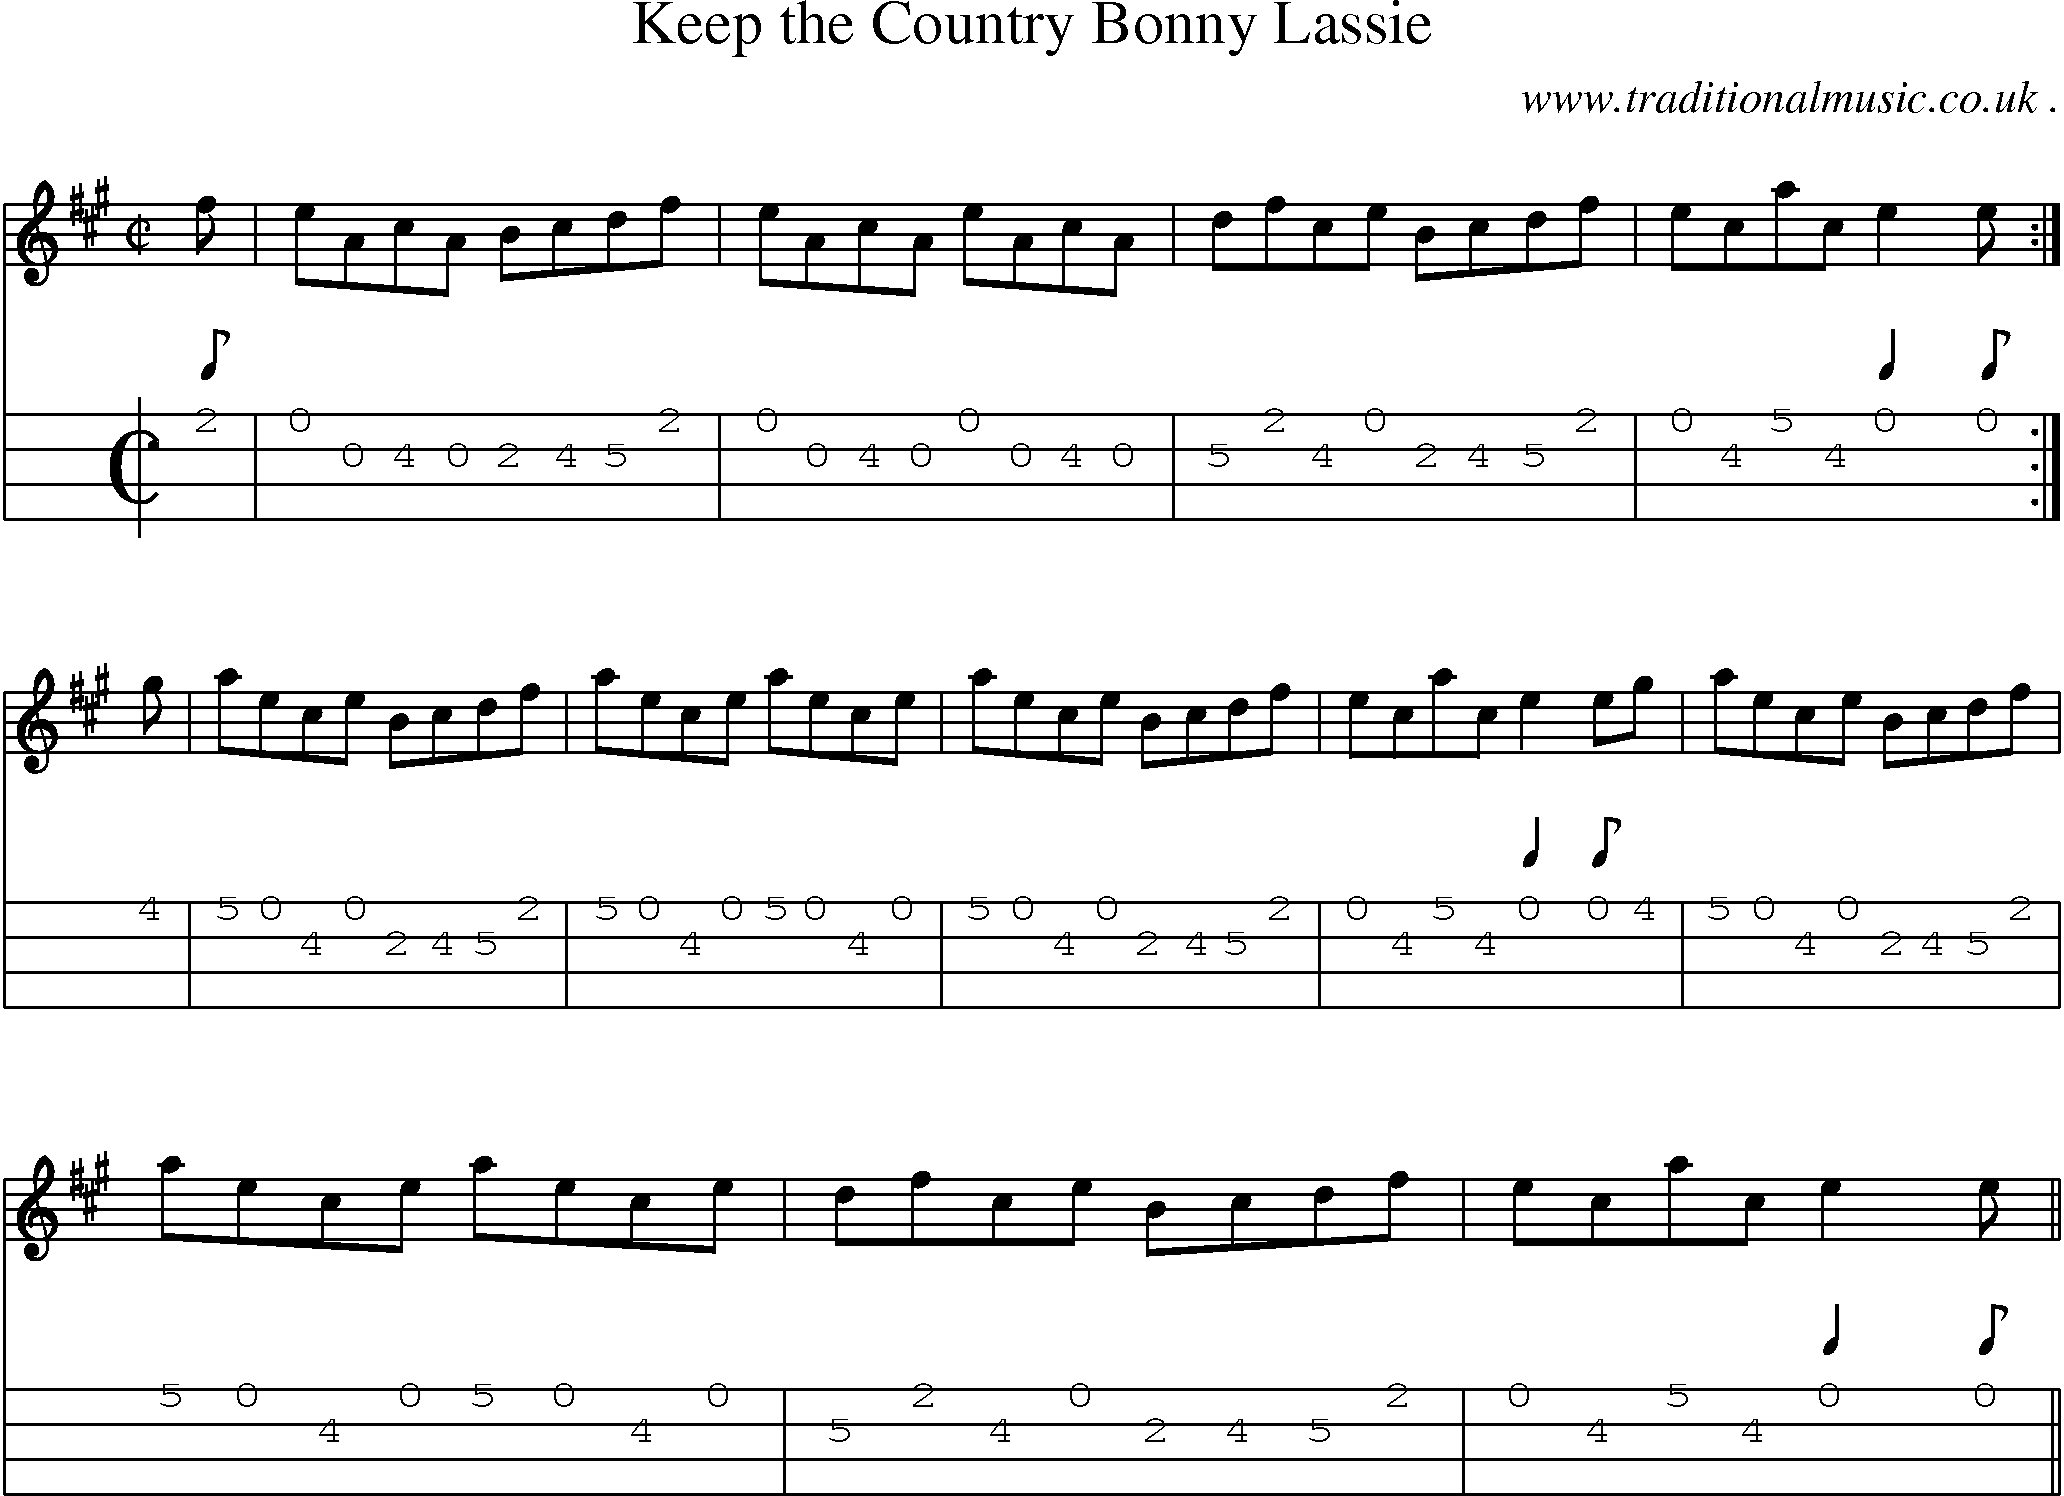 Sheet-music  score, Chords and Mandolin Tabs for Keep The Country Bonny Lassie